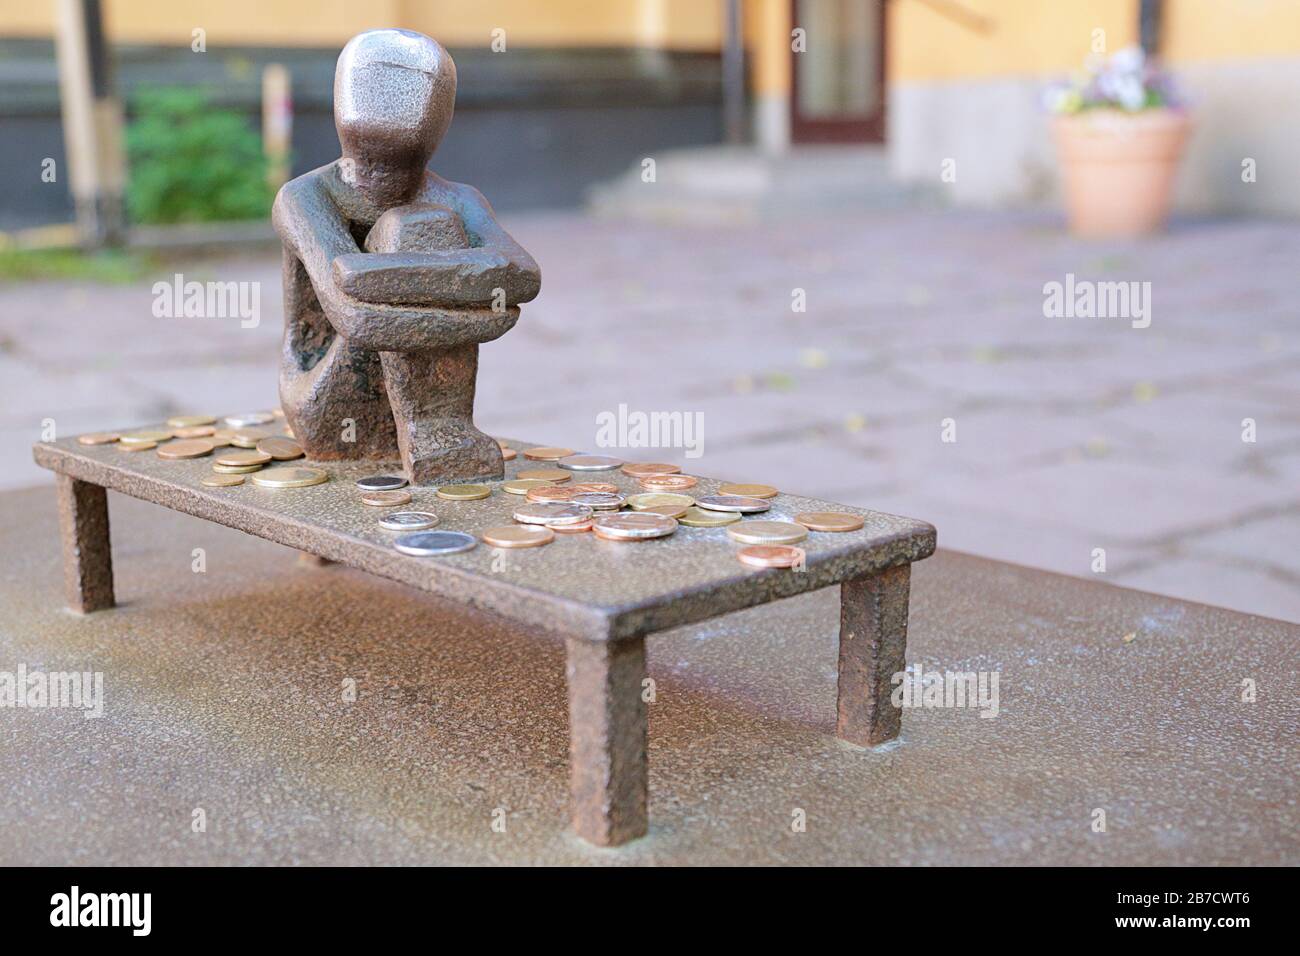 Stockholm, Sweden -  June 21, 2019: Jarnpojke or Iron Boy known as the little boy who looks at the moon is a tiny sculpture in Gamla stan Stock Photo